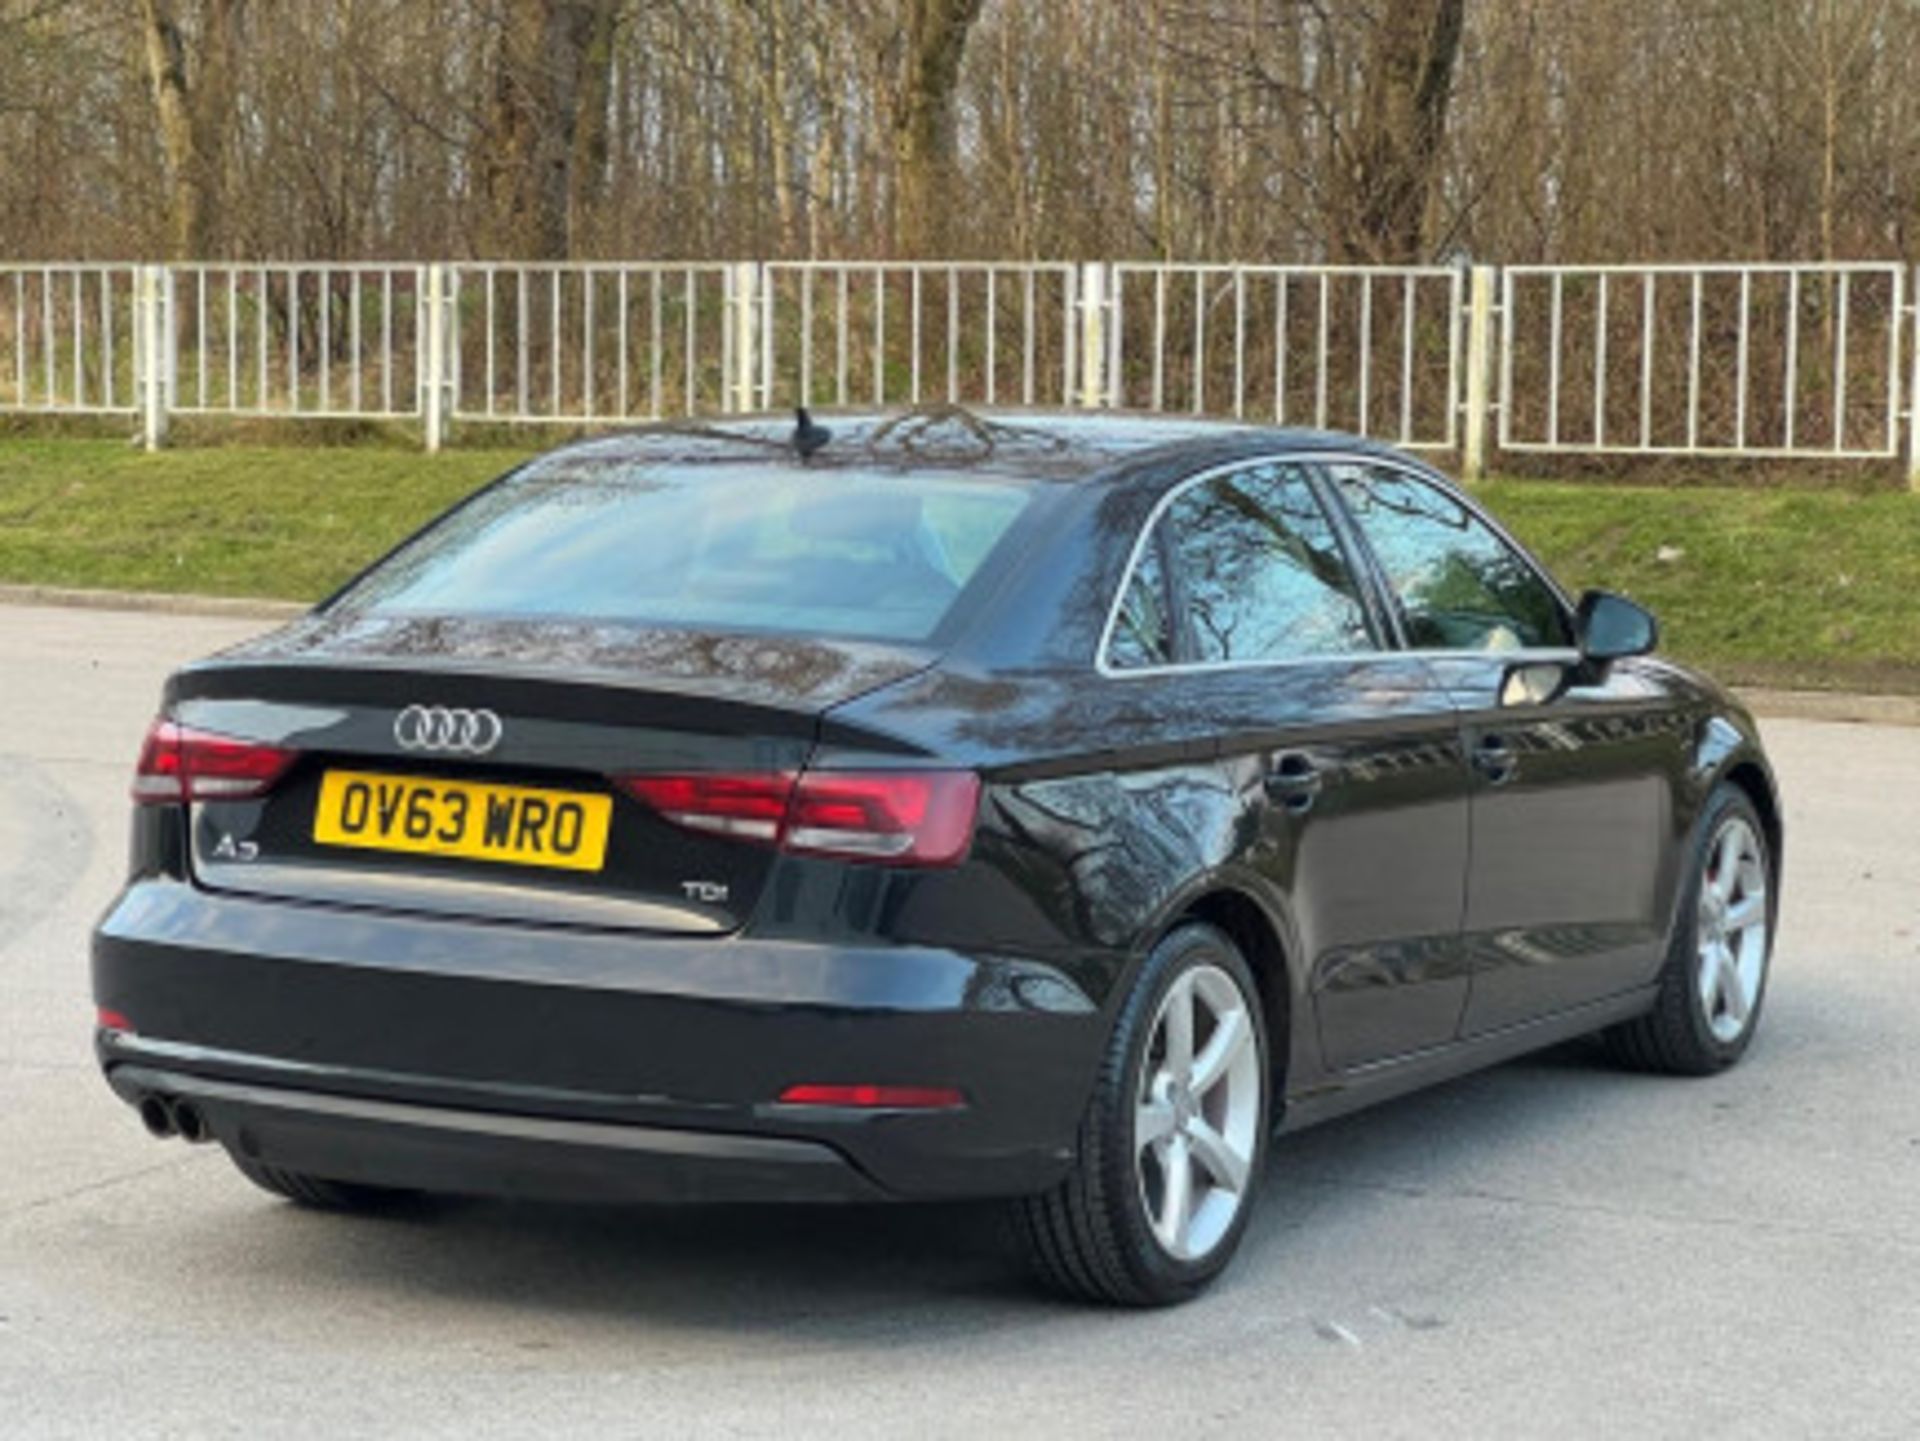 AUDI A3 2.0TDI SPORTBACK - STYLE, PERFORMANCE, AND COMFORT COMBINED >>--NO VAT ON HAMMER--<< - Image 113 of 216